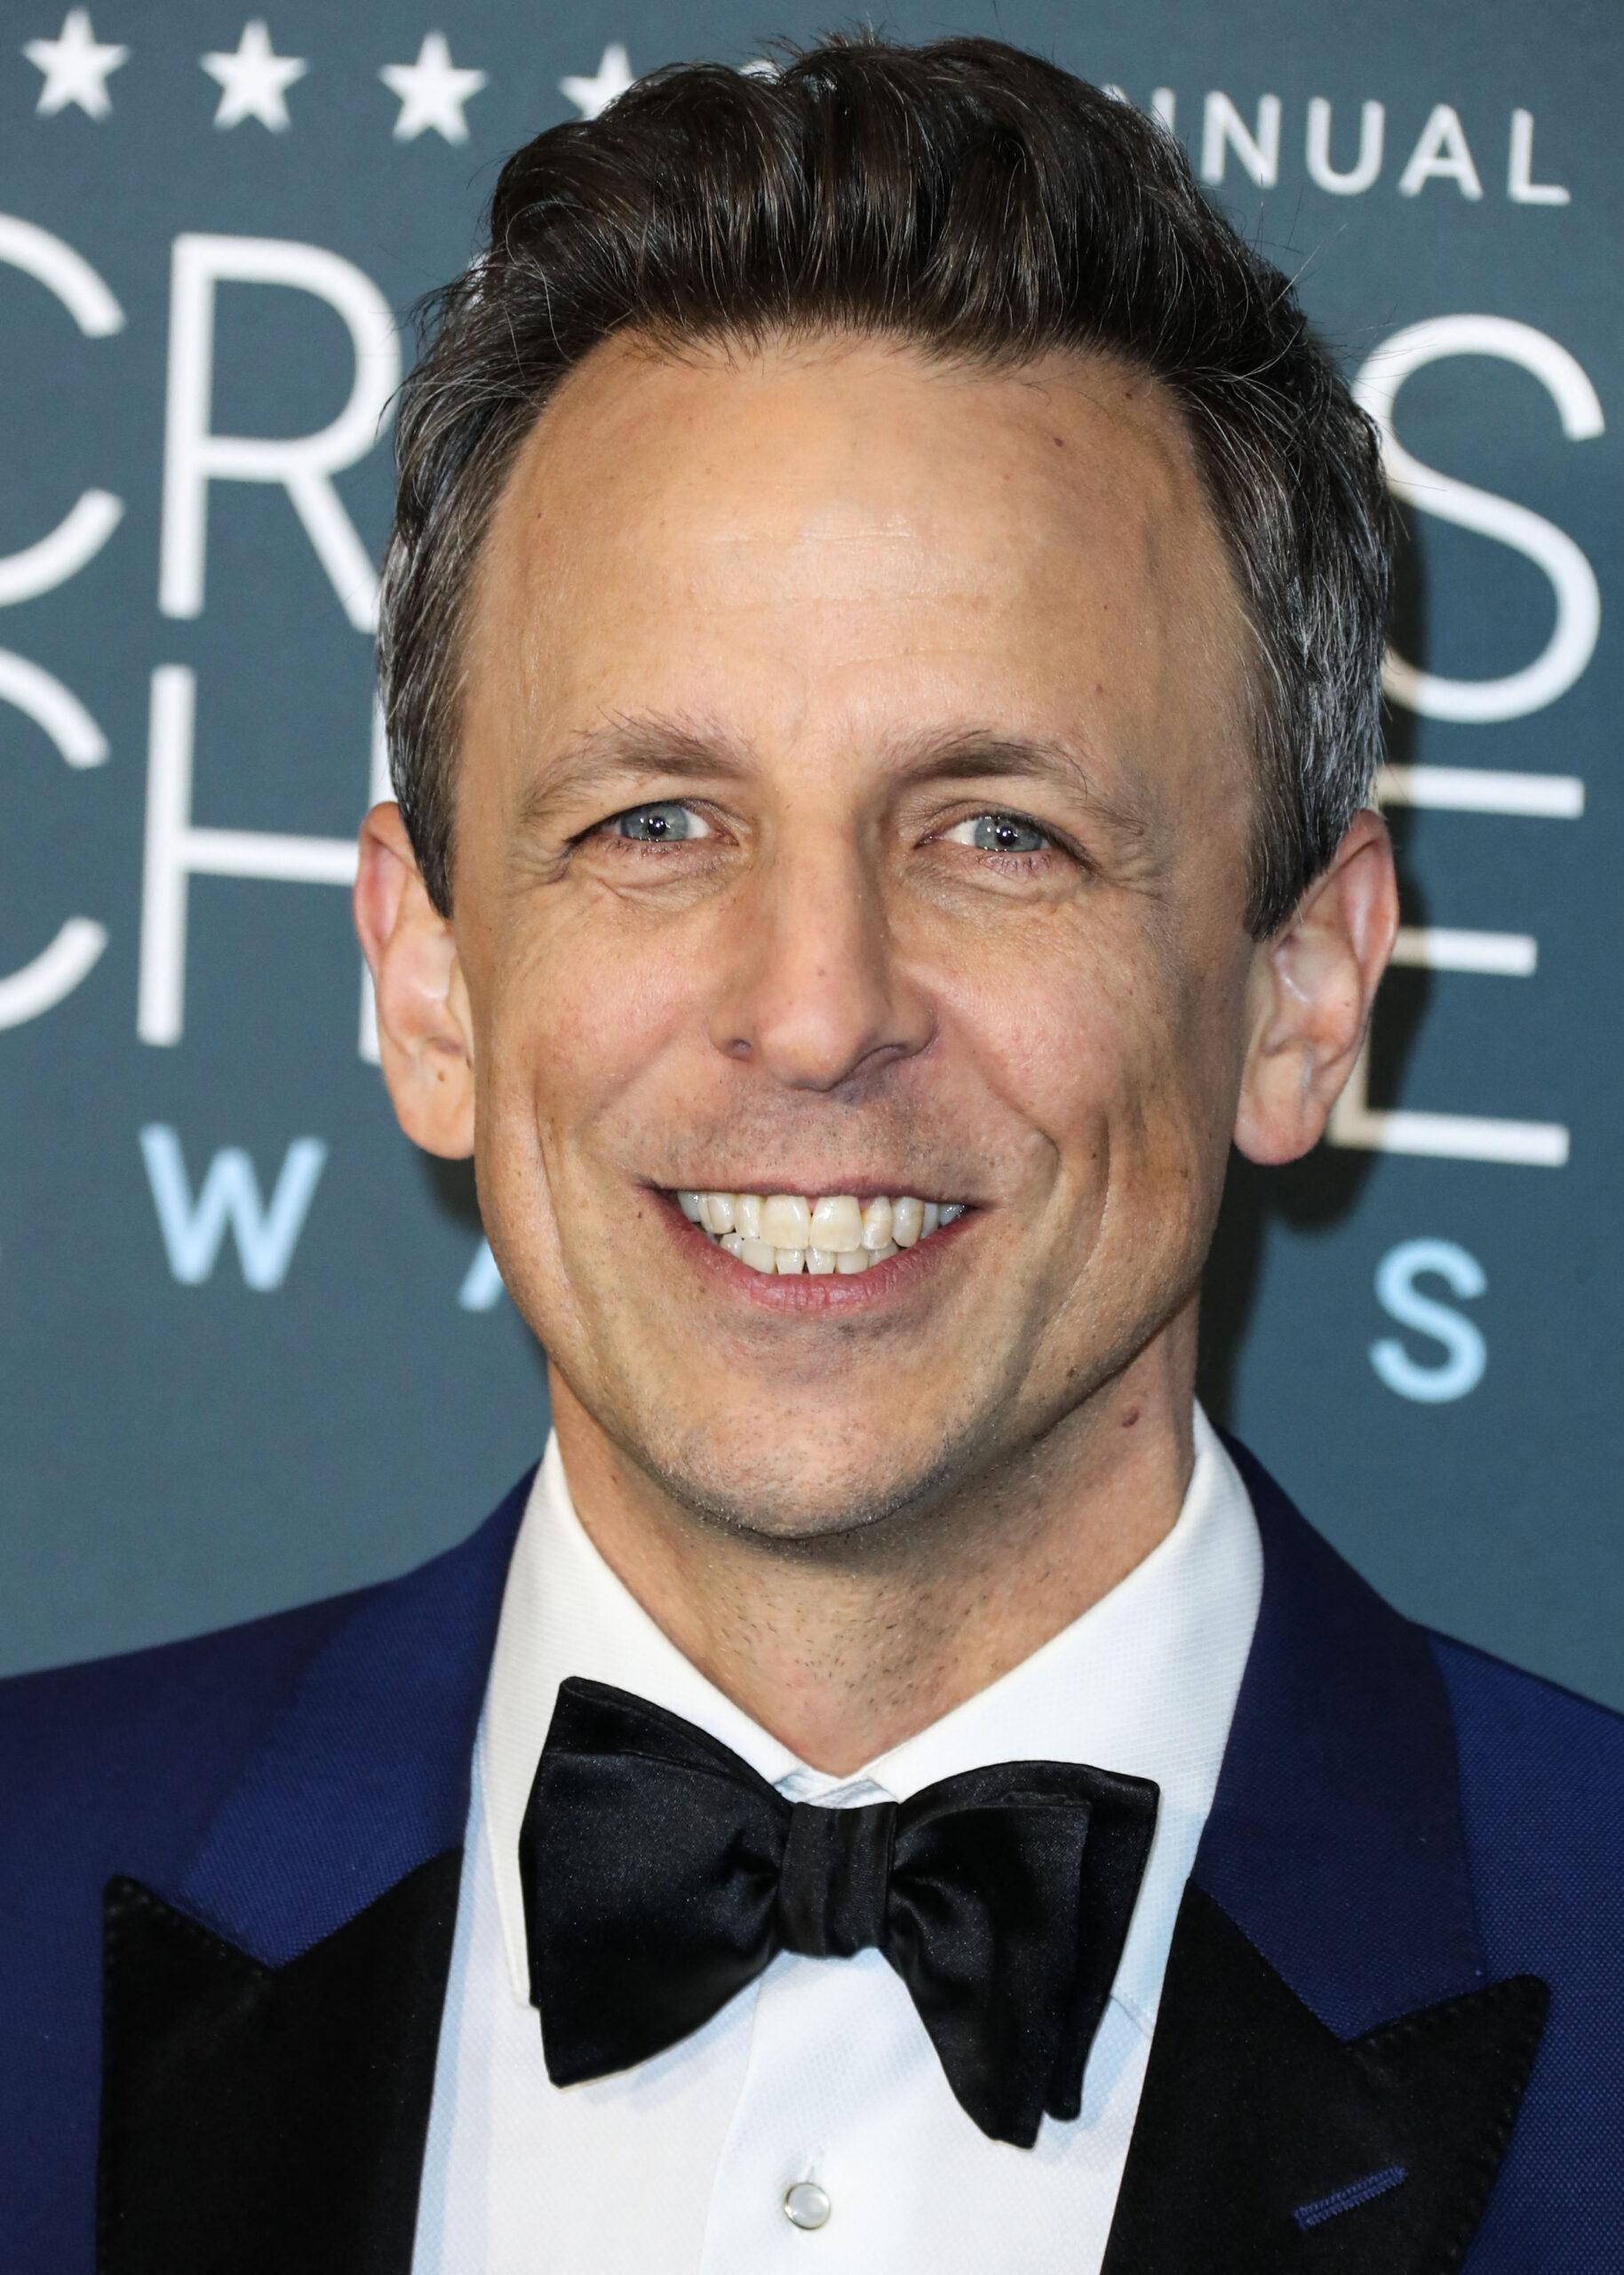 Seth Meyers On Taylor Swift NFL Hate: 'Why Are You So Mad?'